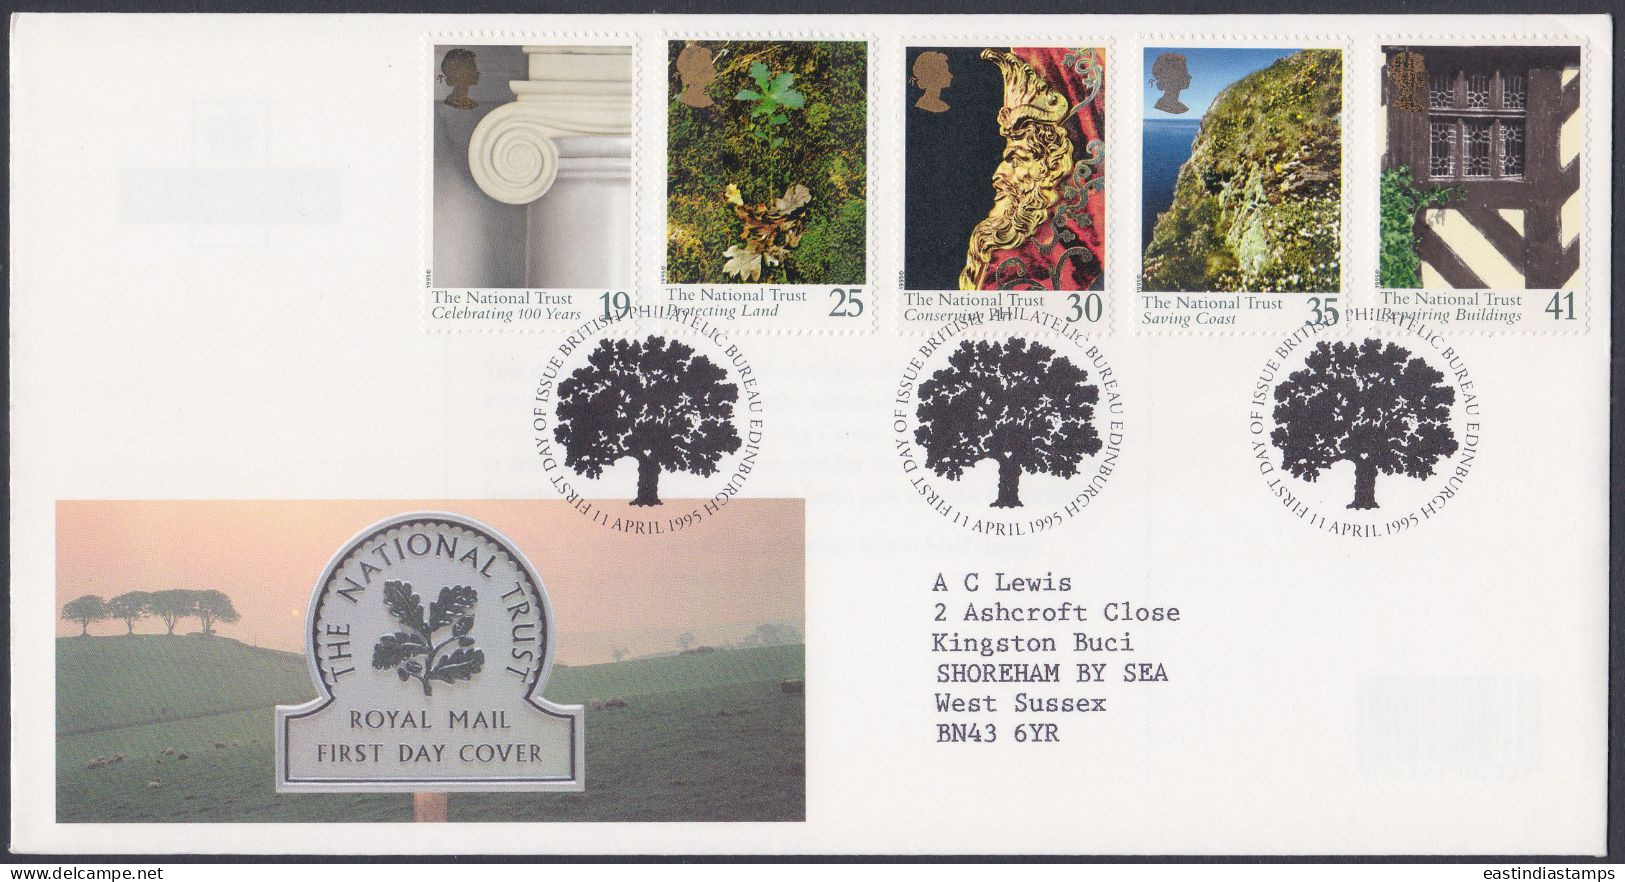 GB Great Britain 1995 FDC The National Trust, Tree, Trees, Nature, Natural, Forest, Pictorial Postmark, First Day Cover - Covers & Documents